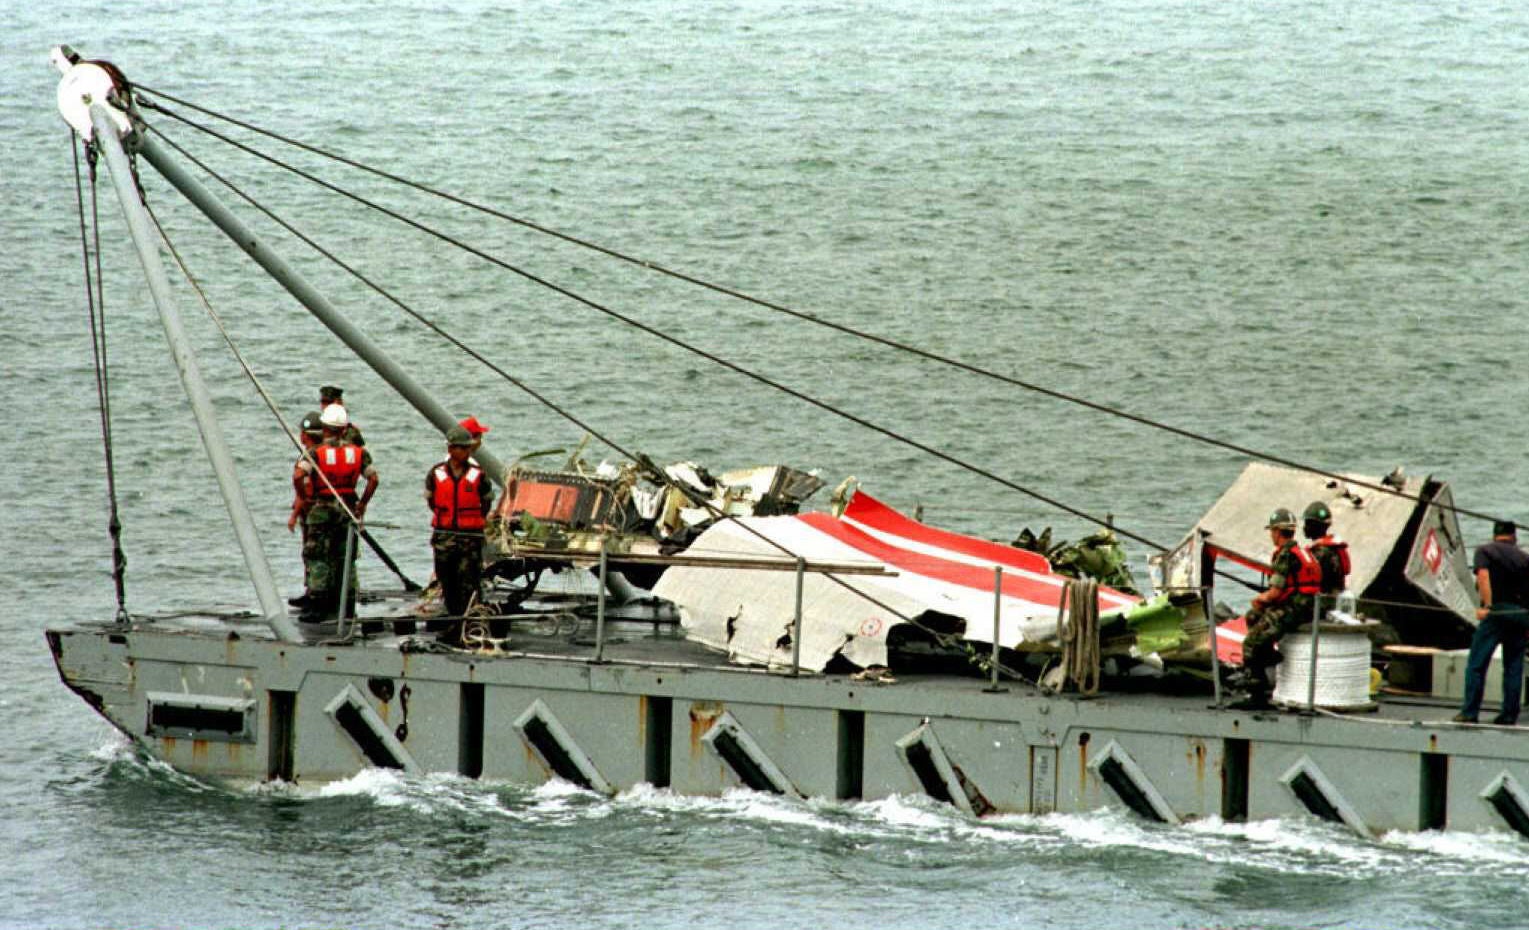 Wreckage from TWA’s flight 800 is brought to the Shinnecock, New York, Coast Guard Station after being recovered from the ocean floor on 29 July 1996